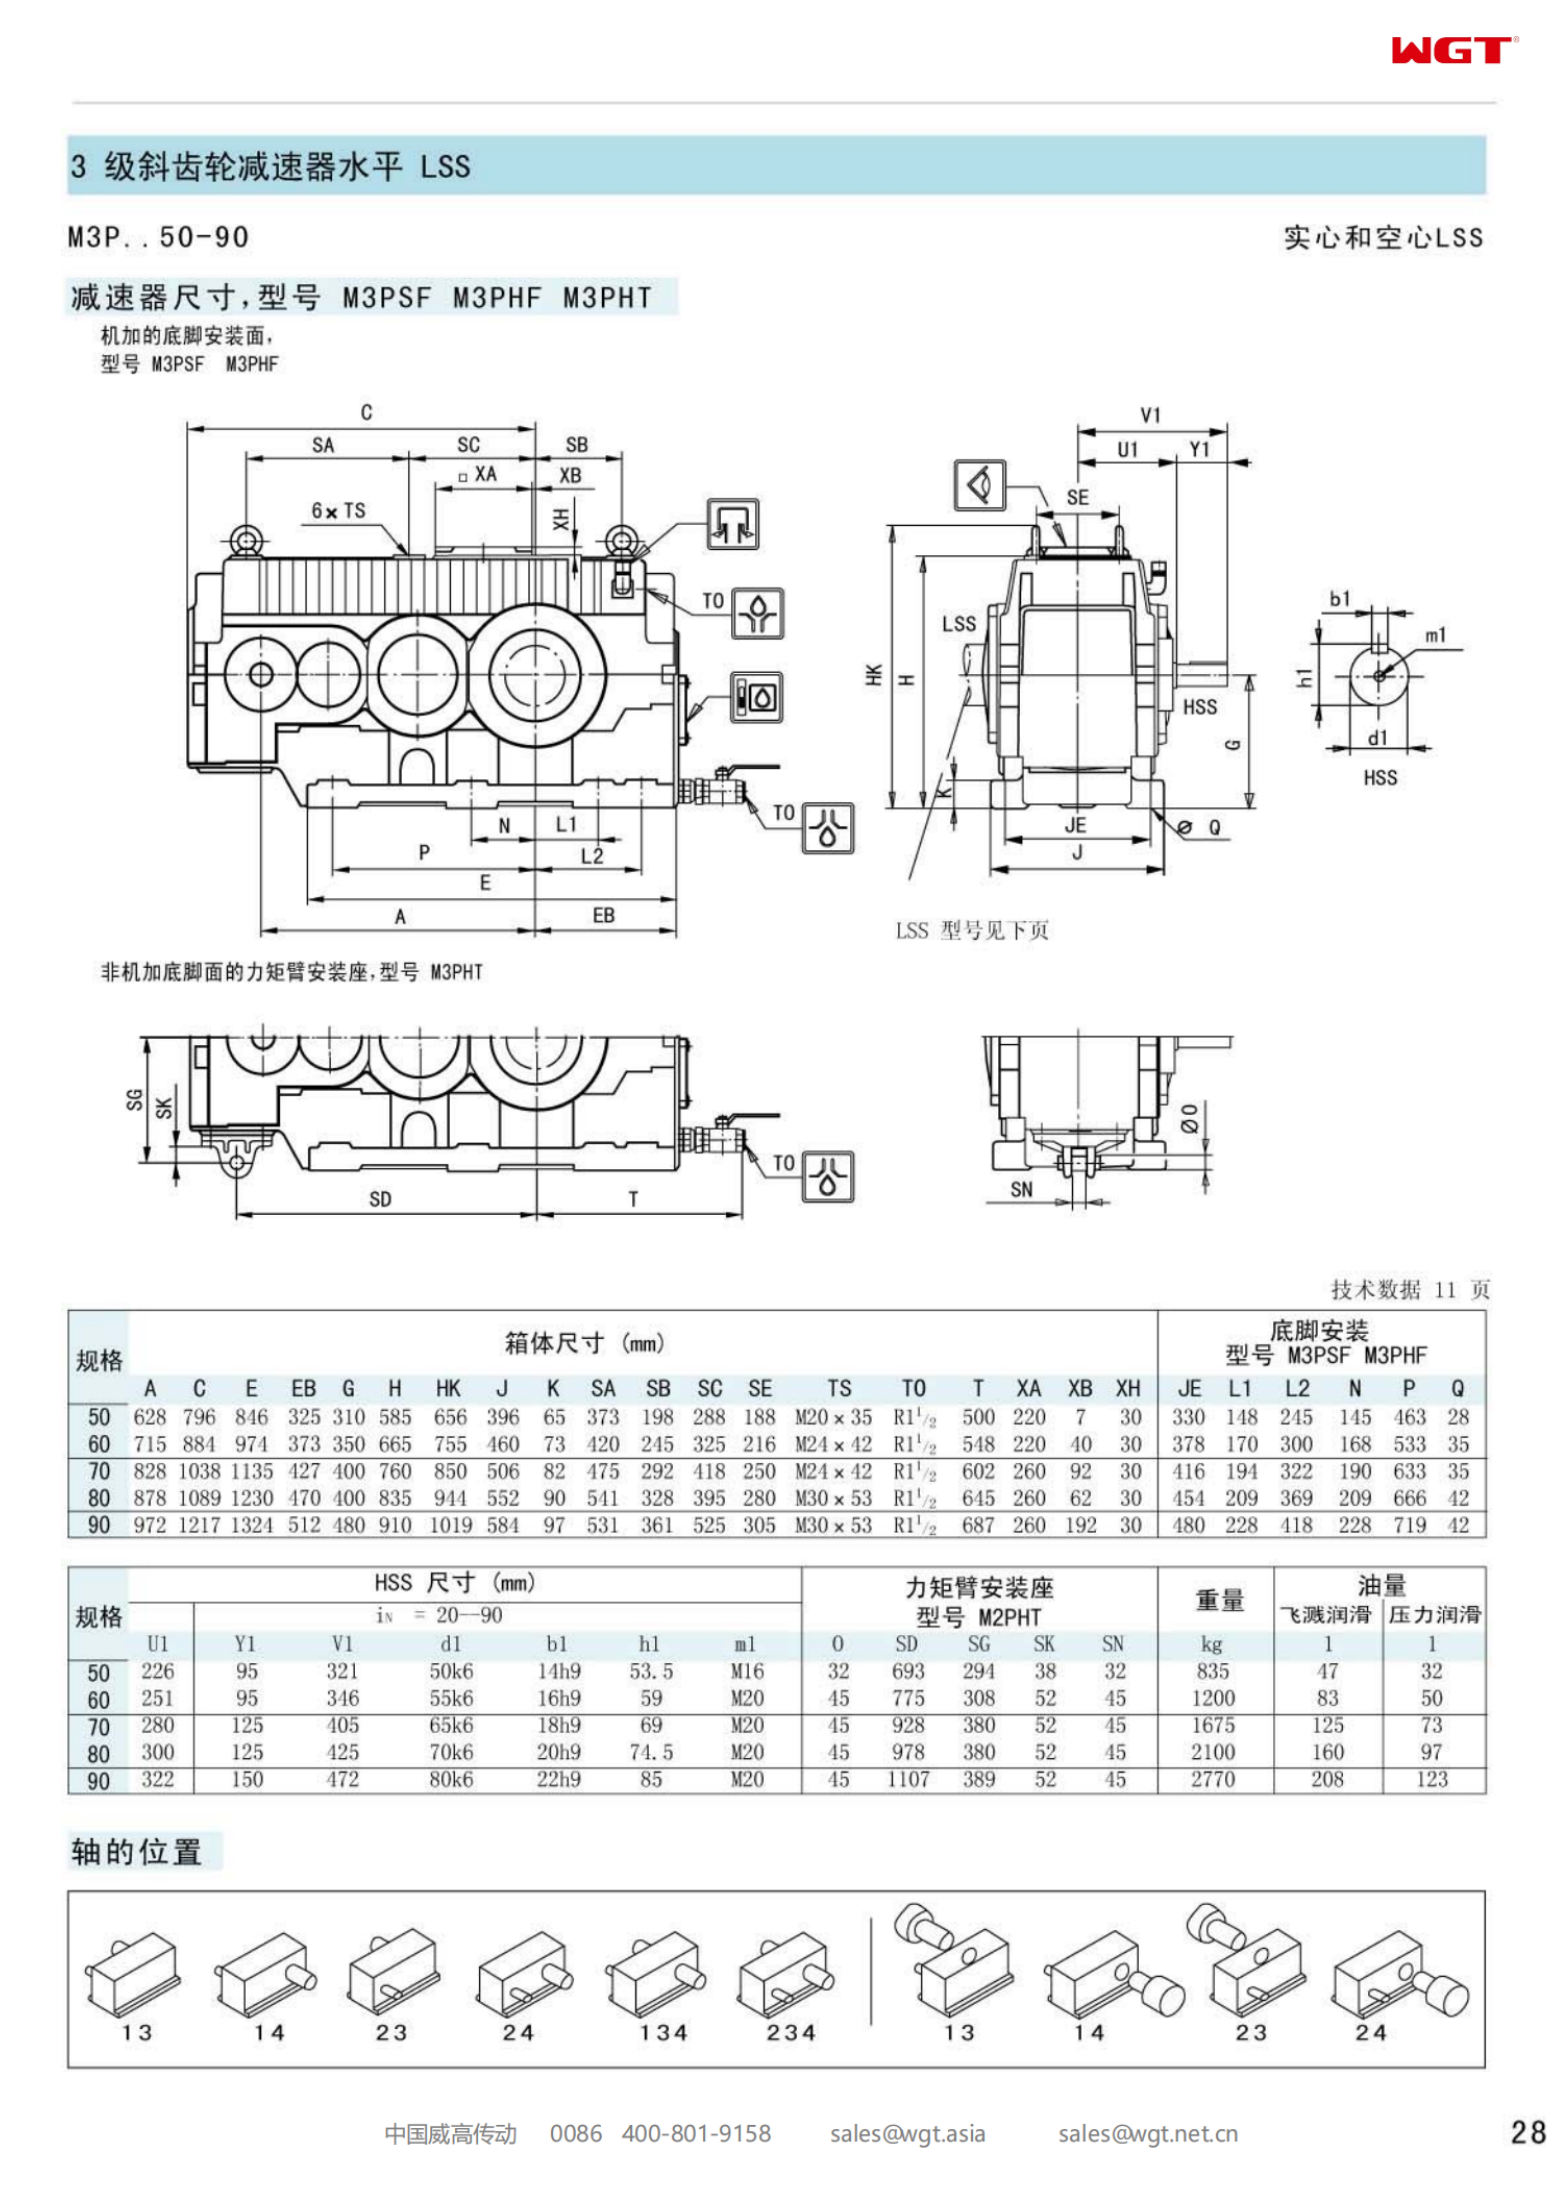 M3PHT60 Replace_SEW_M_Series Gearbox